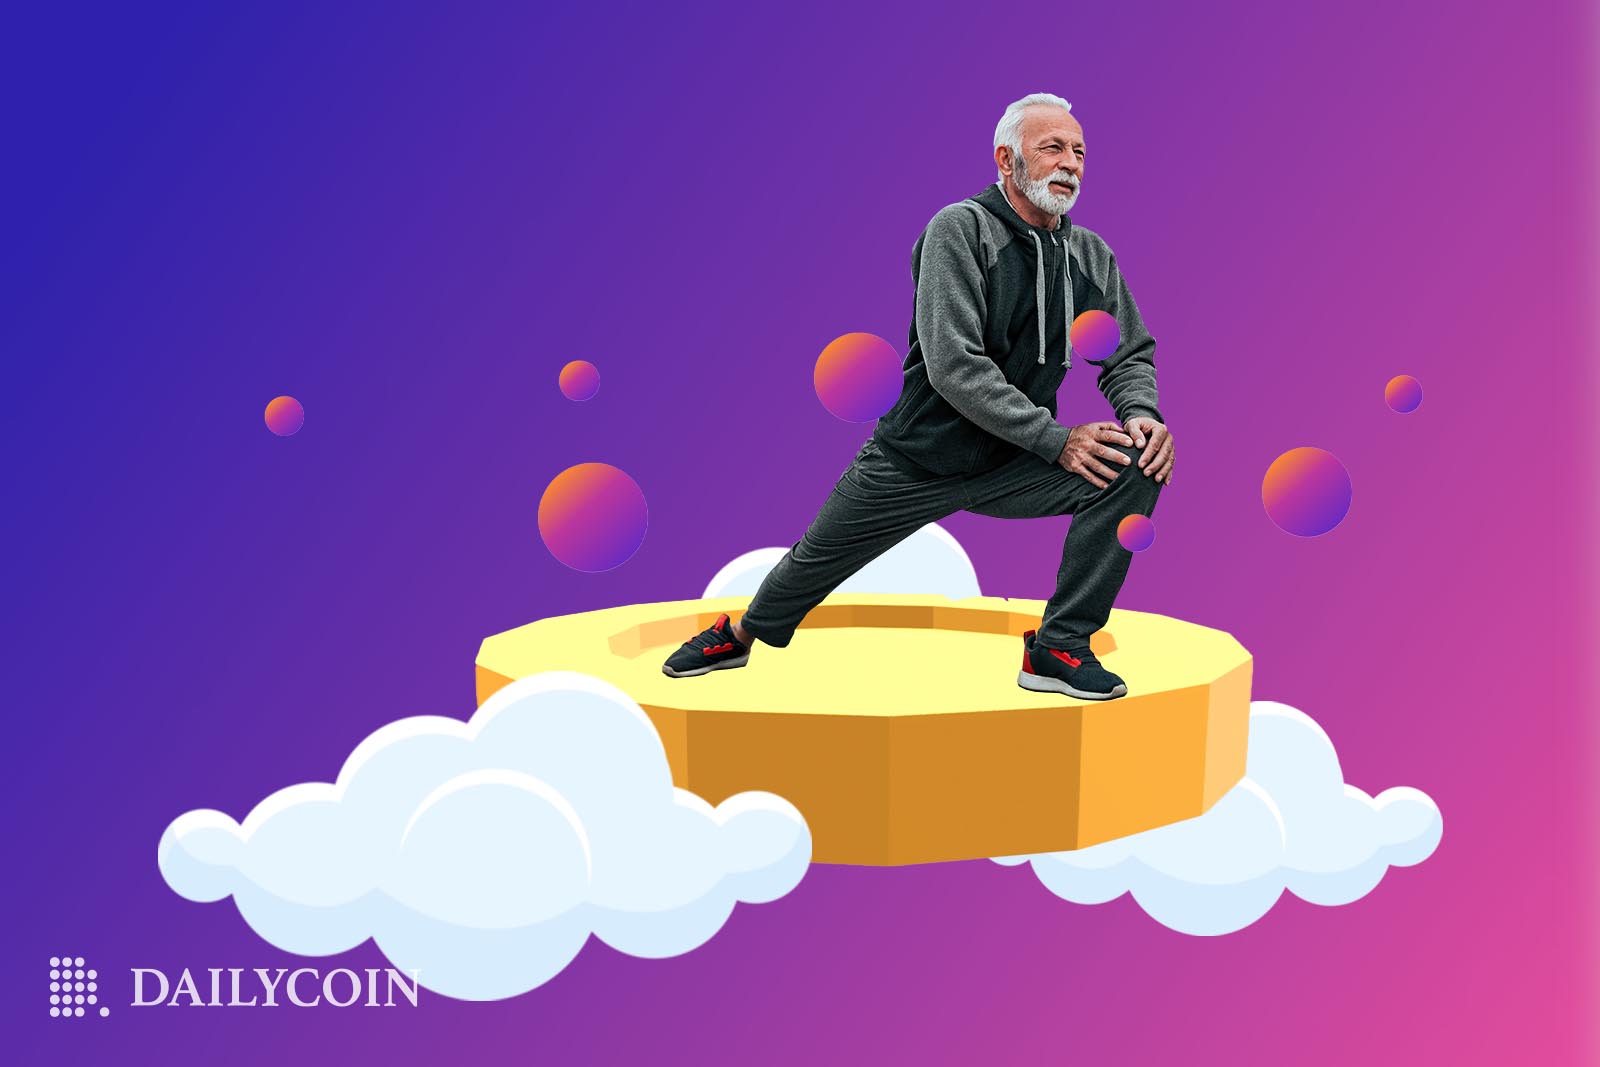 A senior man is stretching on a golden Sweatcoin in a cloud in a purple background.